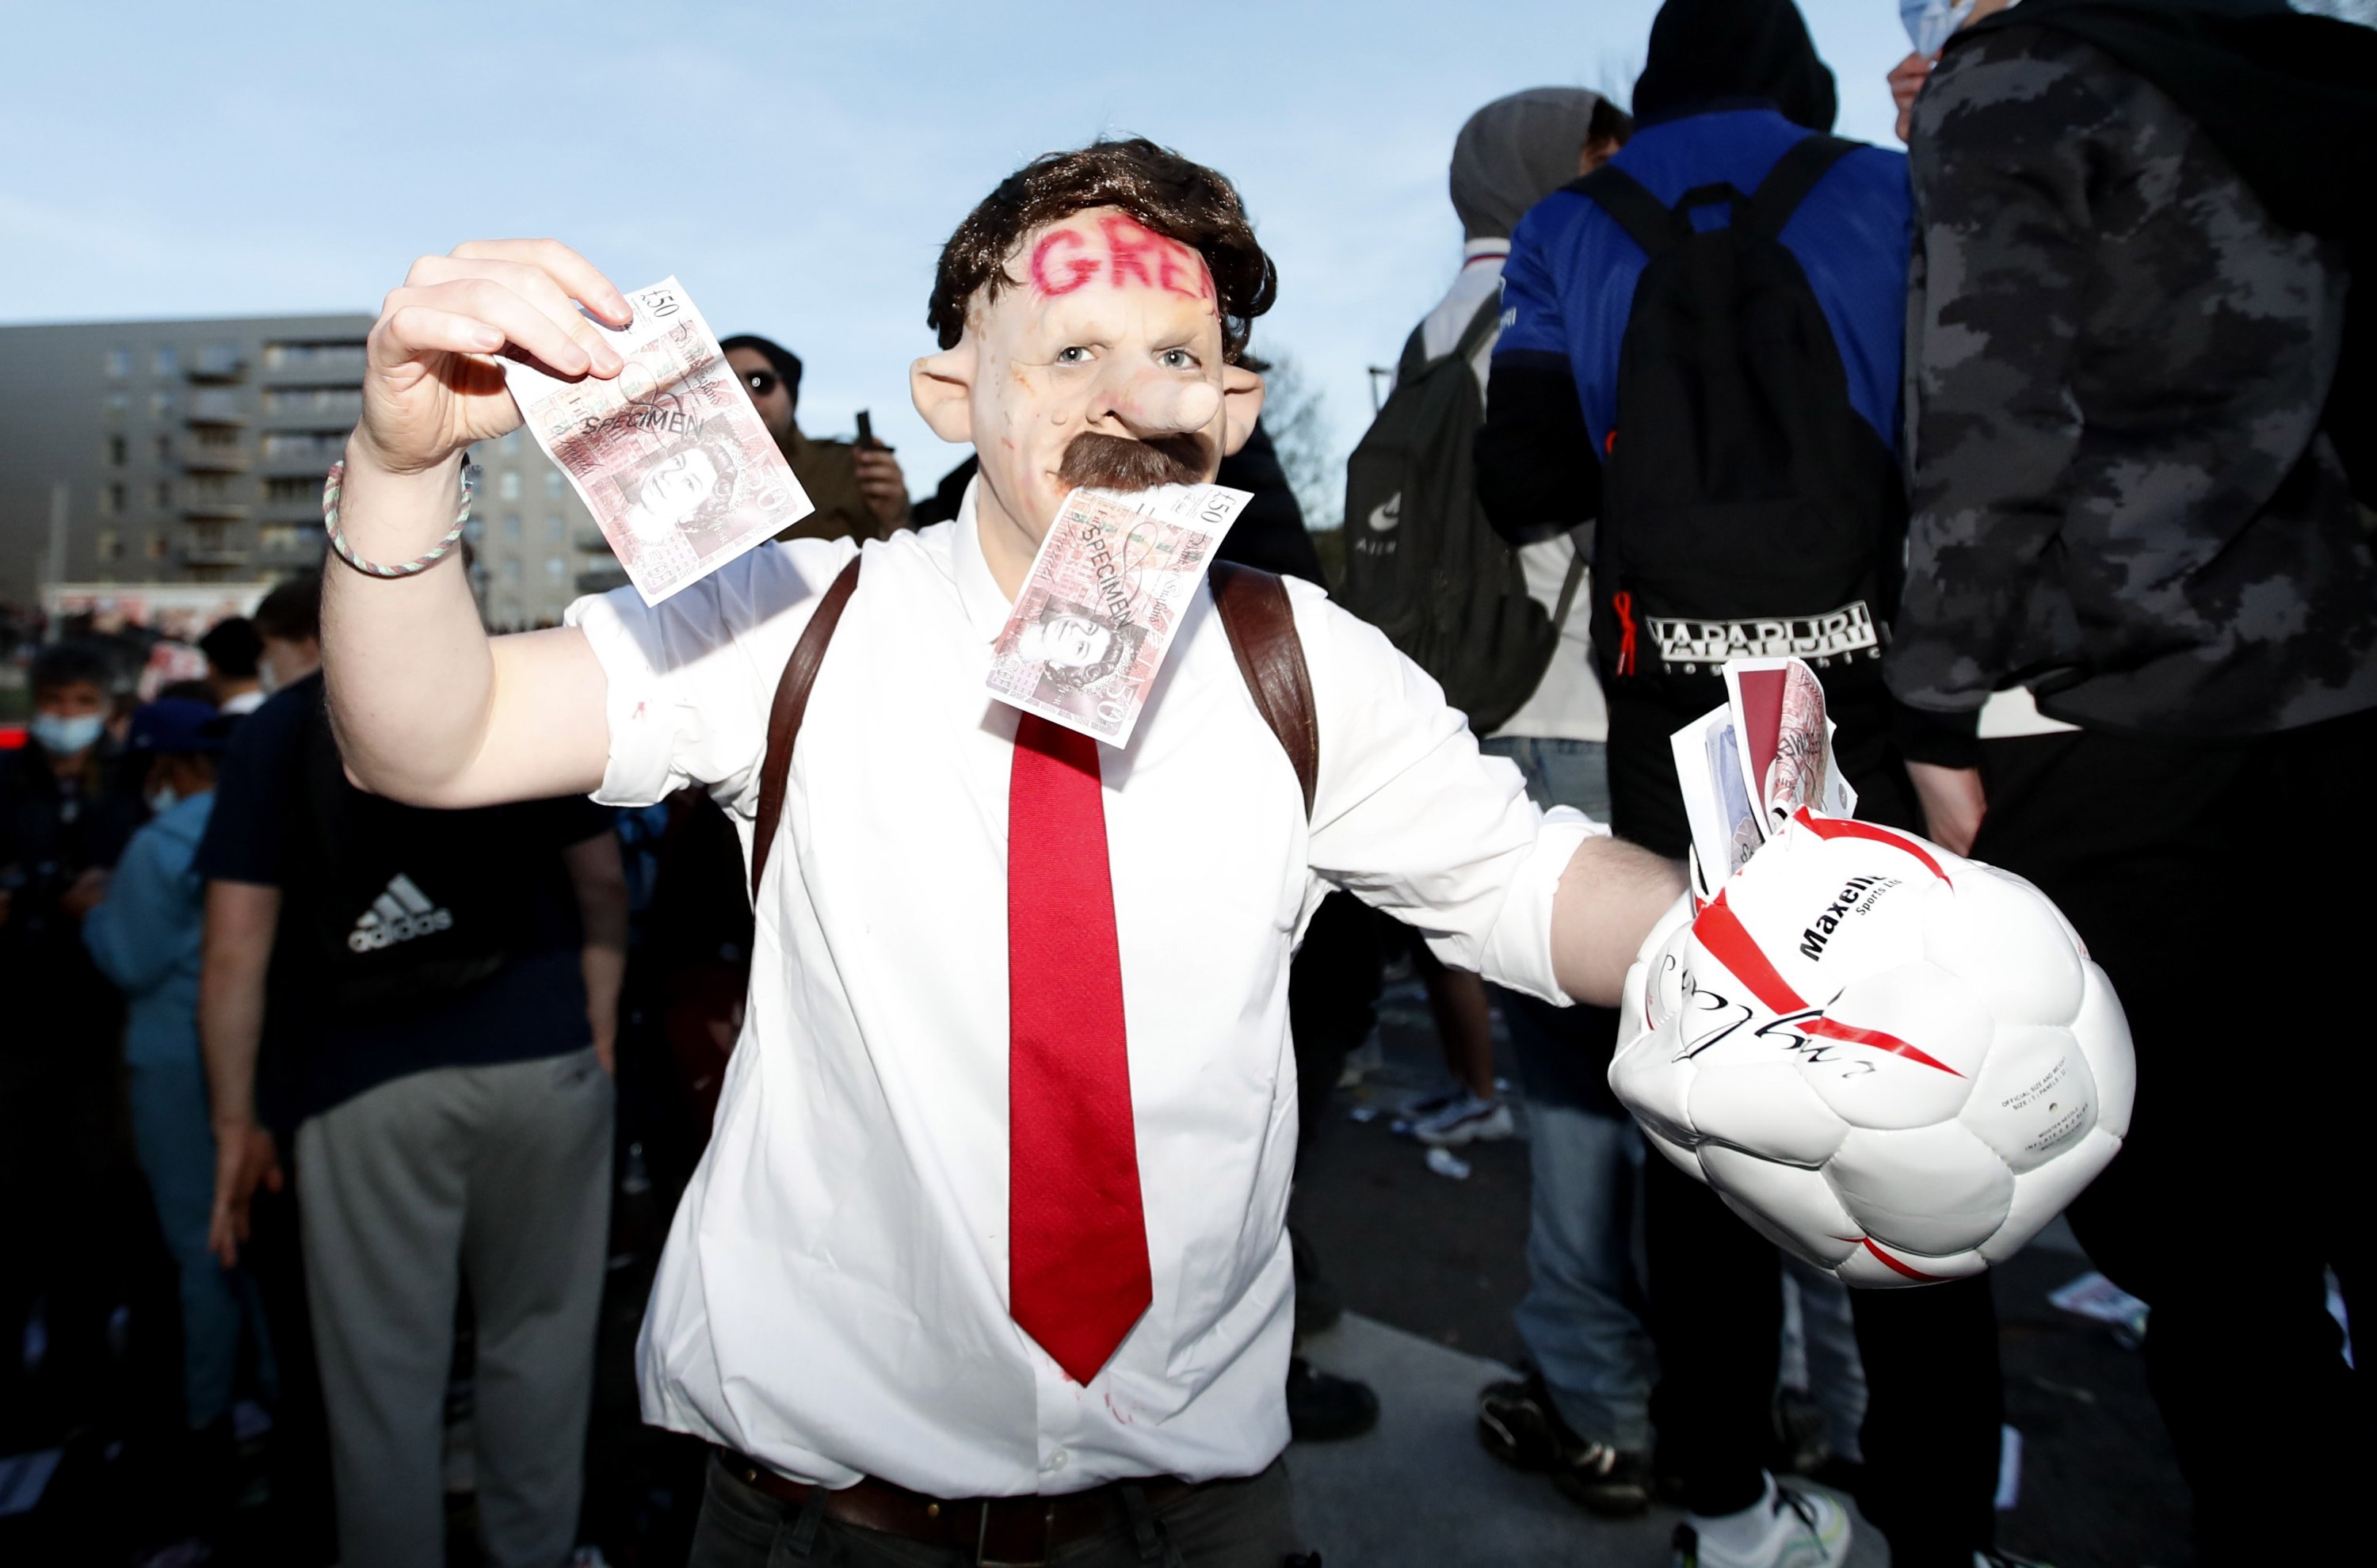 An Arsenal fan wearing a Stan Kroenke mask displays fake money during a demonstration against Arsenal's U.S. owner's involvement in the failed launch of a European Super League, Emirates Stadium, London, Britain, April 23, 2021. (Reuters)